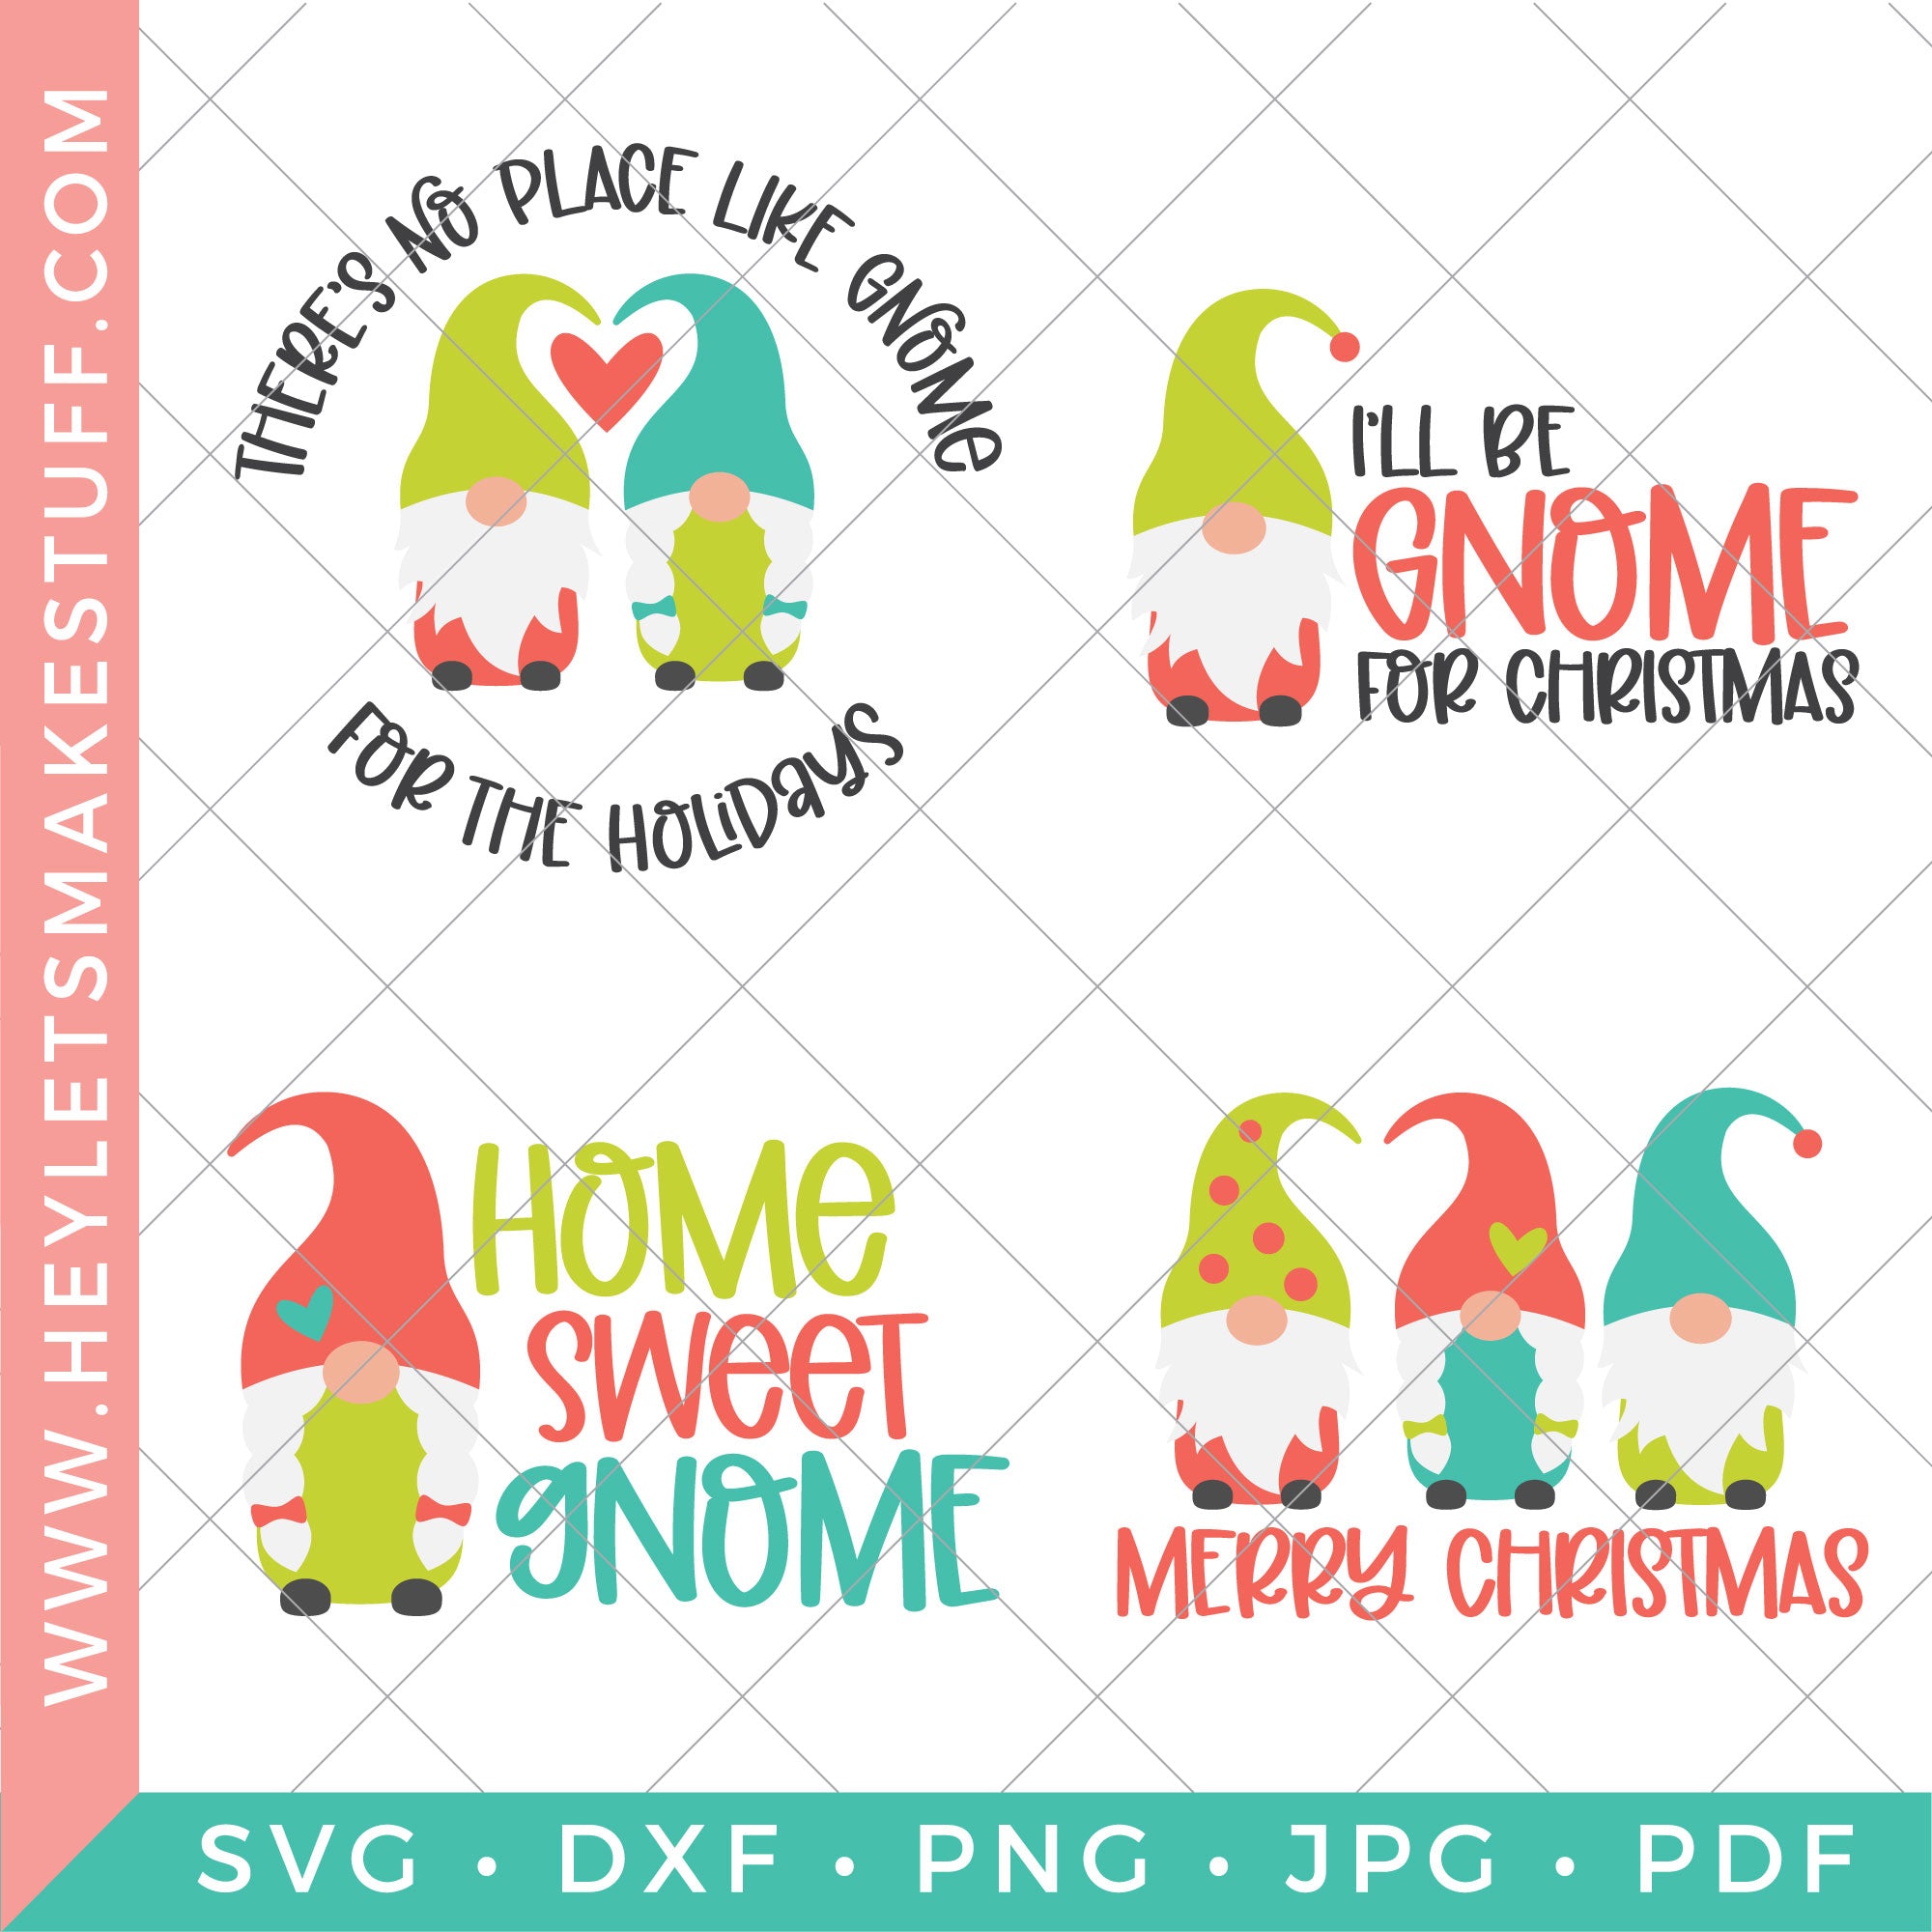 Download Decal Dxf Christmas Gnome Svg Iron On Santa Svg Cute Craft Silhouette Printable Christmas Svg Cricut Shirt Elf Svg Gnome Svg Craft Supplies Tools Collage